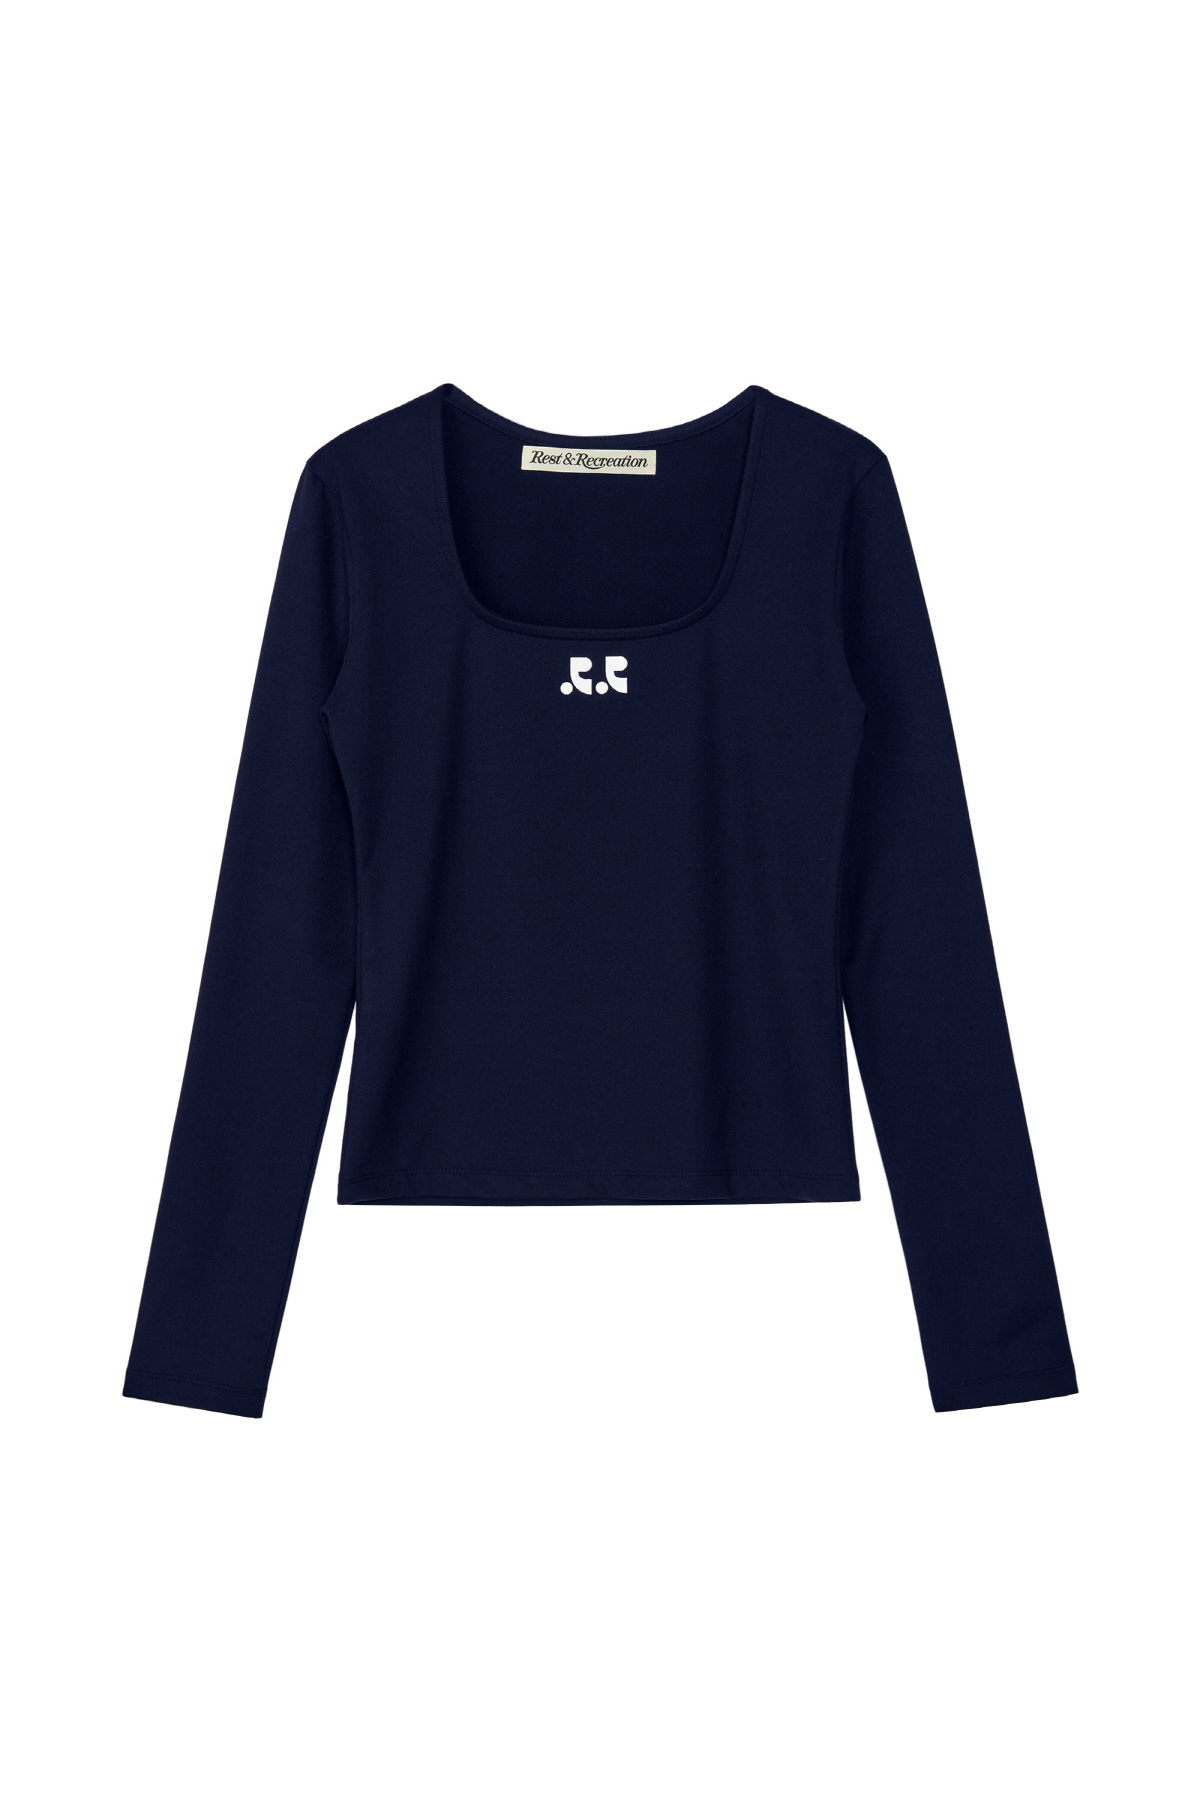 RR SQUARE NECK LONG SLEEVE - NAVY